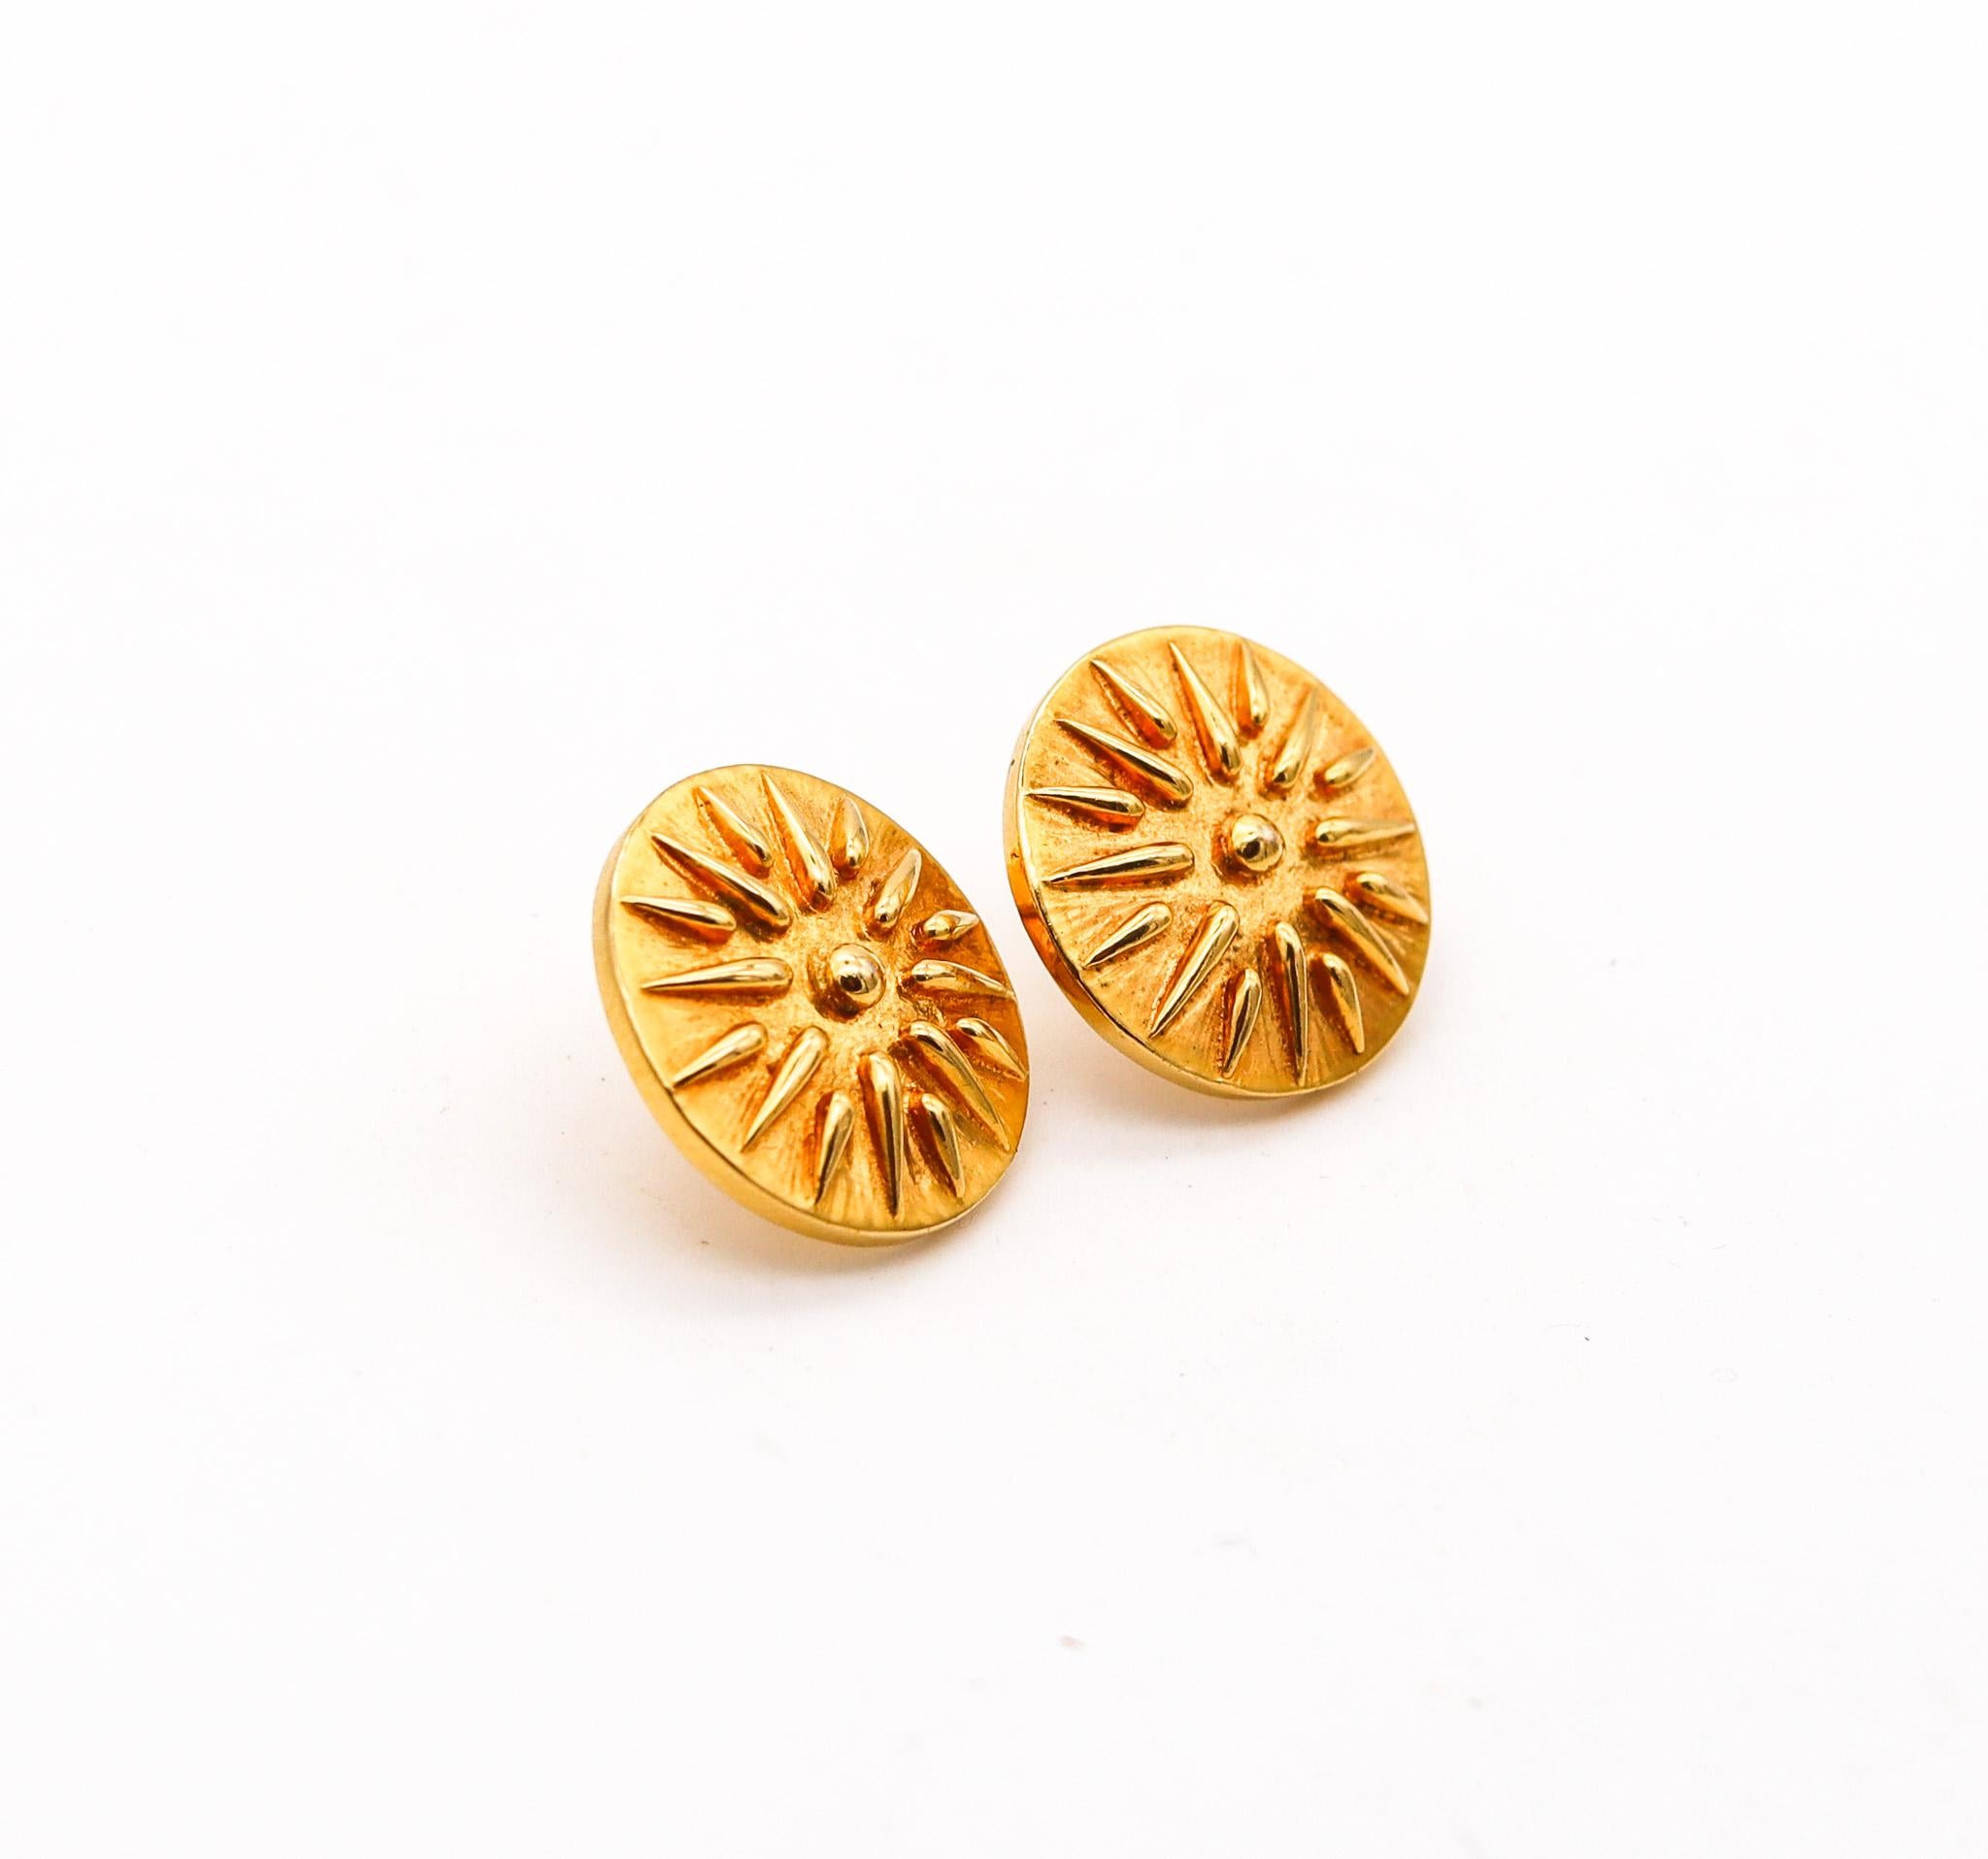 Stud earrings designed by Zolotas.

Beautiful pair of round stud earrings, created in Greece by the jewelry makers of Zolotas. These earrings have been crafted with ancient Greeks patterns in solid rich yellow gold of 18 karats with brushed,